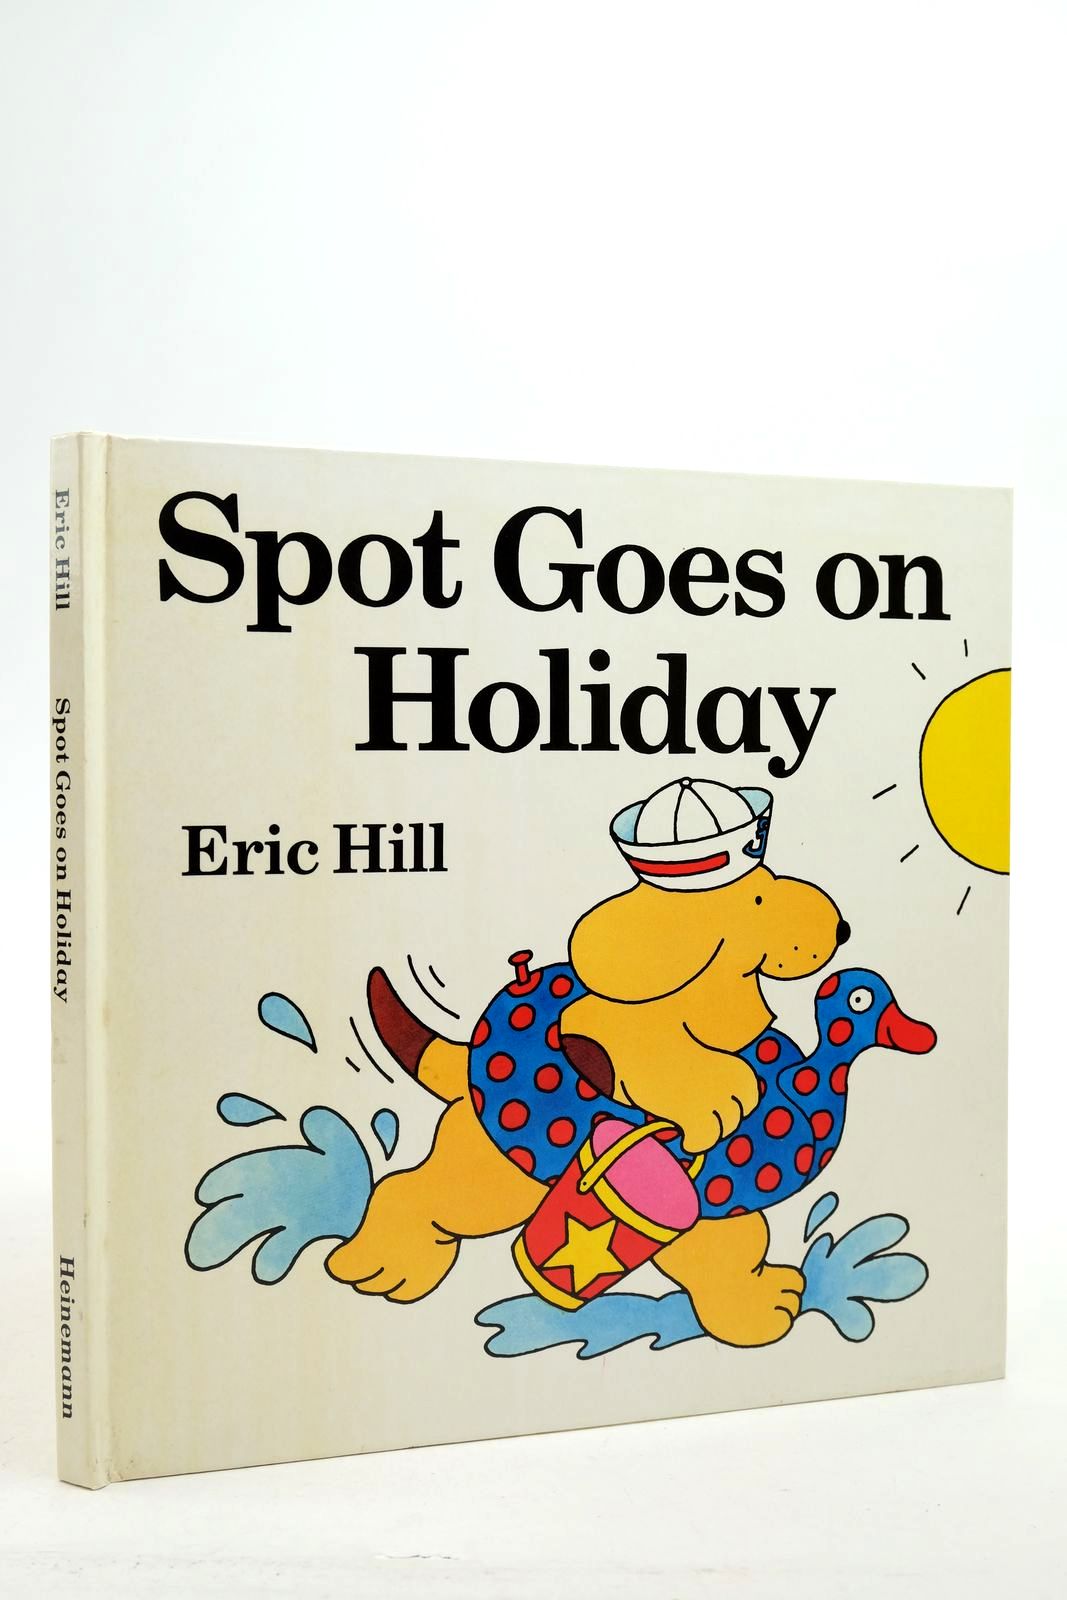 Photo of SPOT GOES ON HOLIDAY written by Hill, Eric illustrated by Hill, Eric published by William Heinemann Ltd. (STOCK CODE: 2140565)  for sale by Stella & Rose's Books